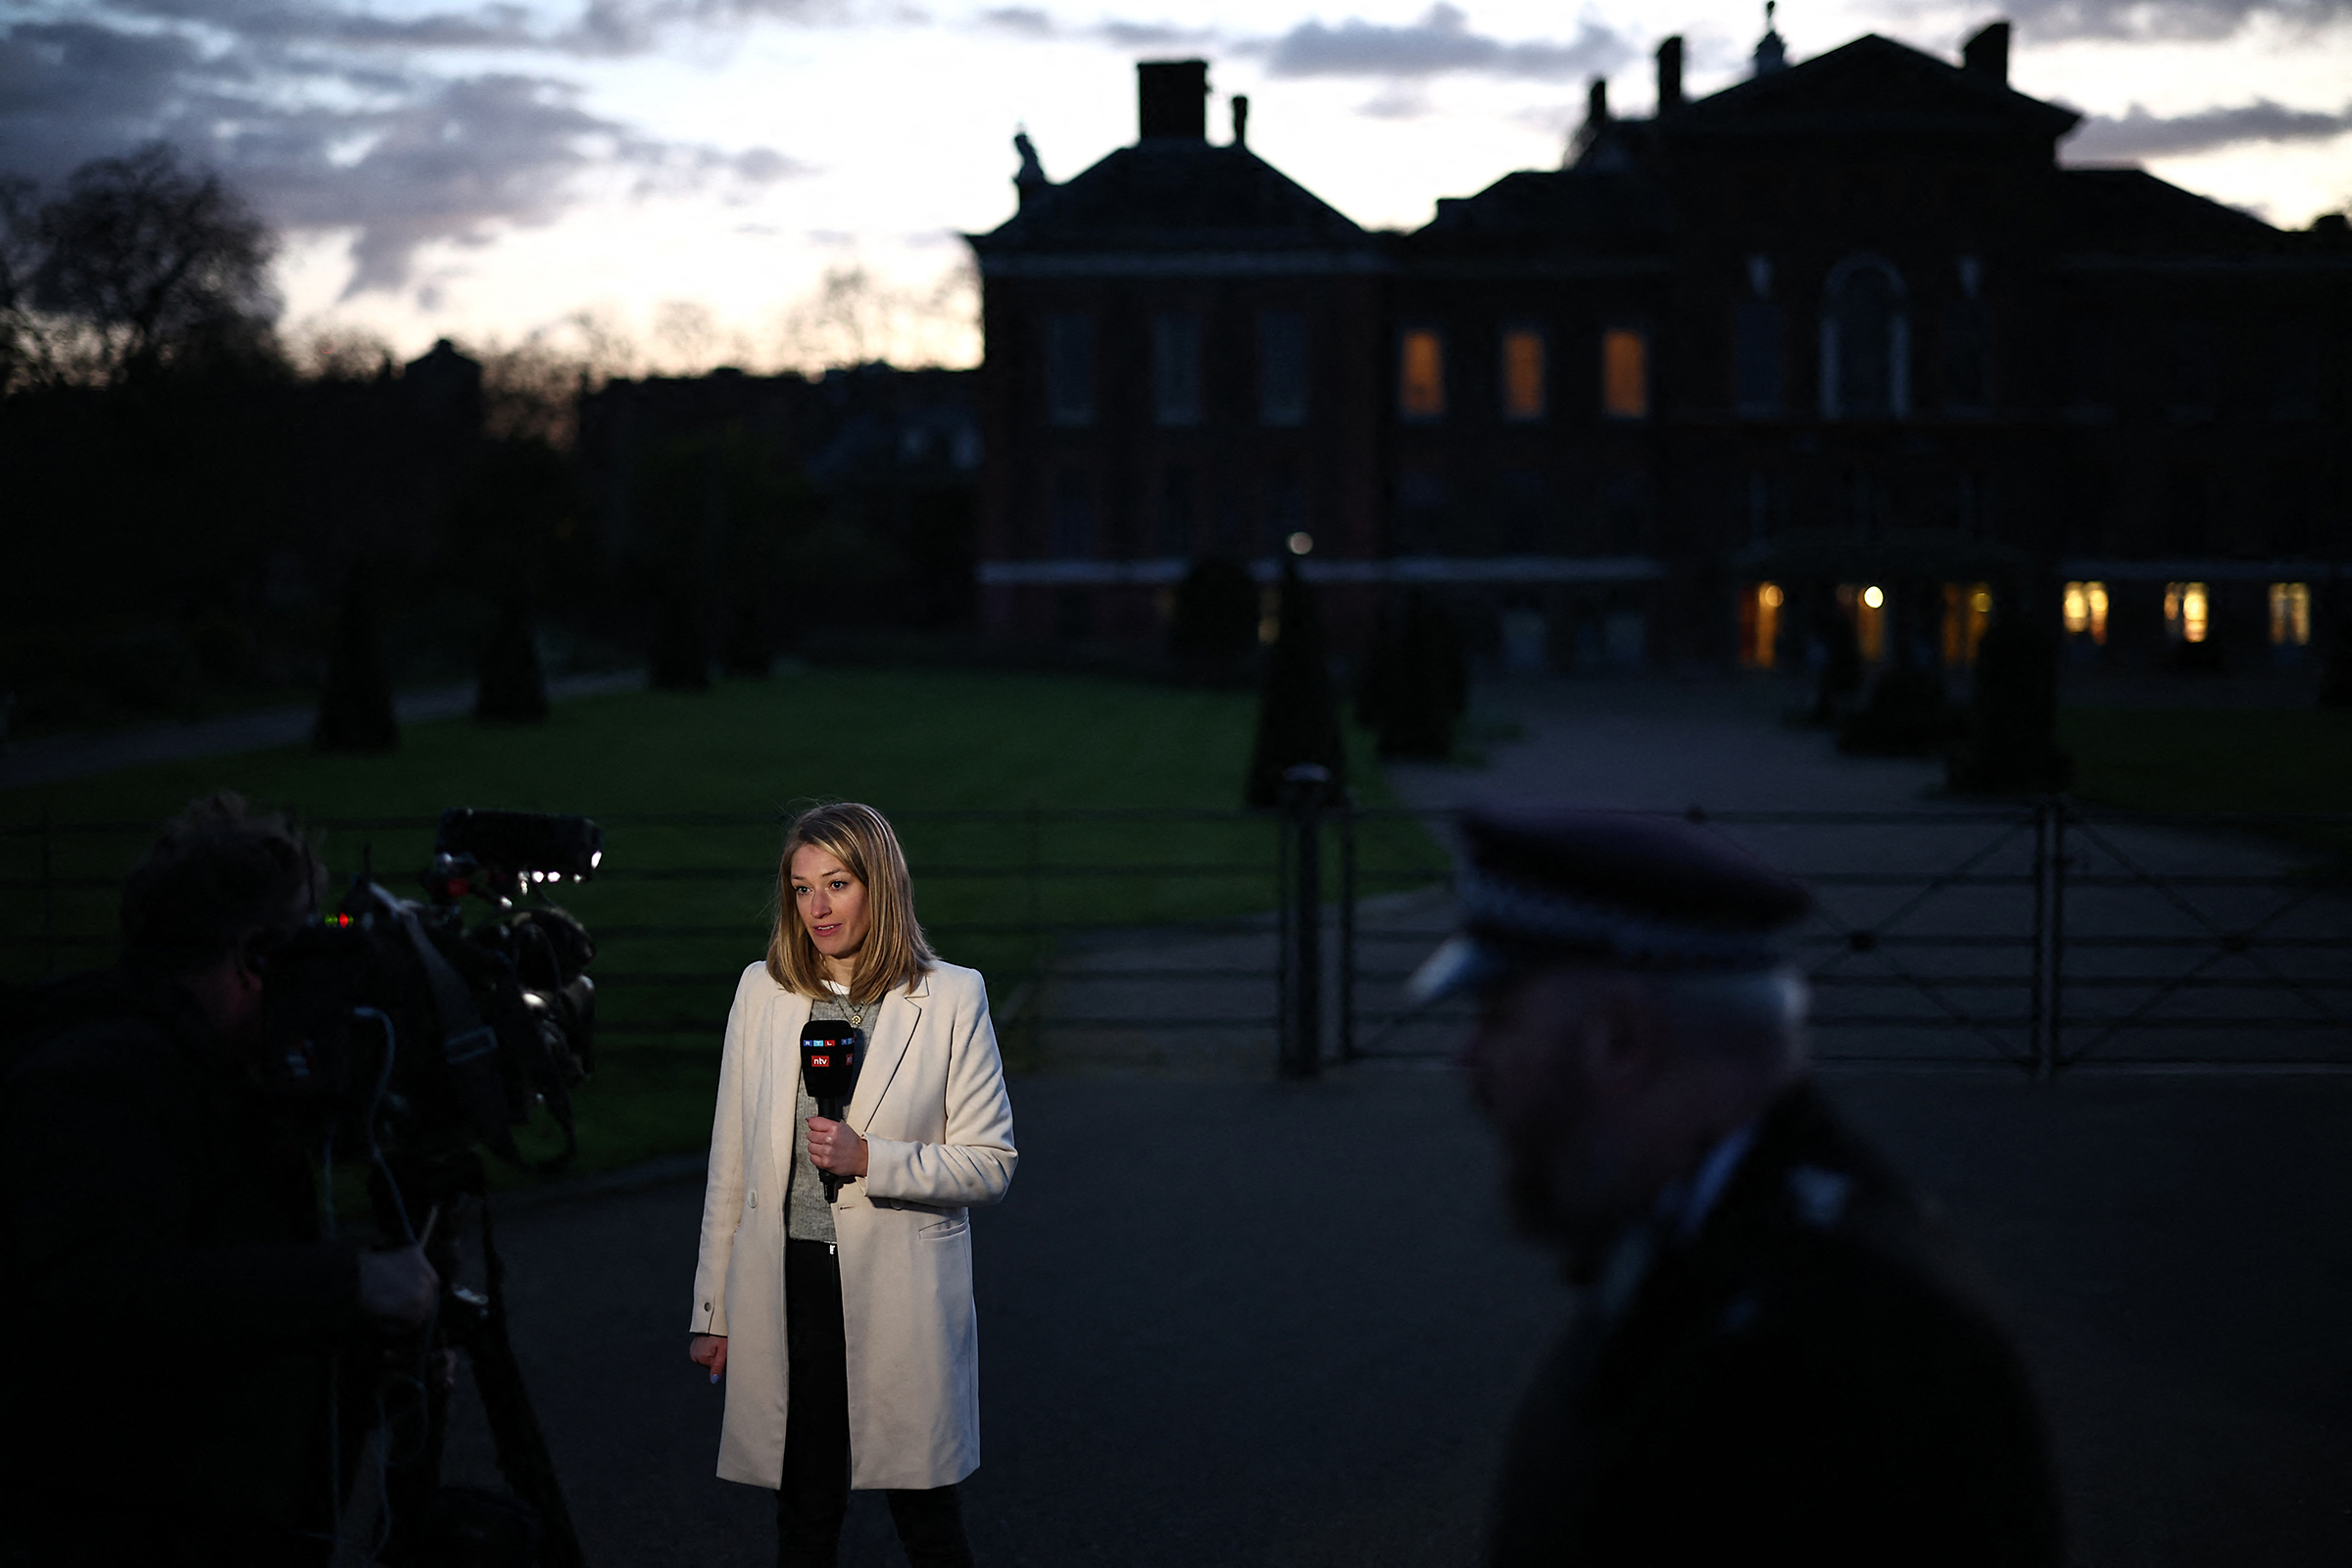 A journalist reports from outside Kensington Palace in London on March 22.